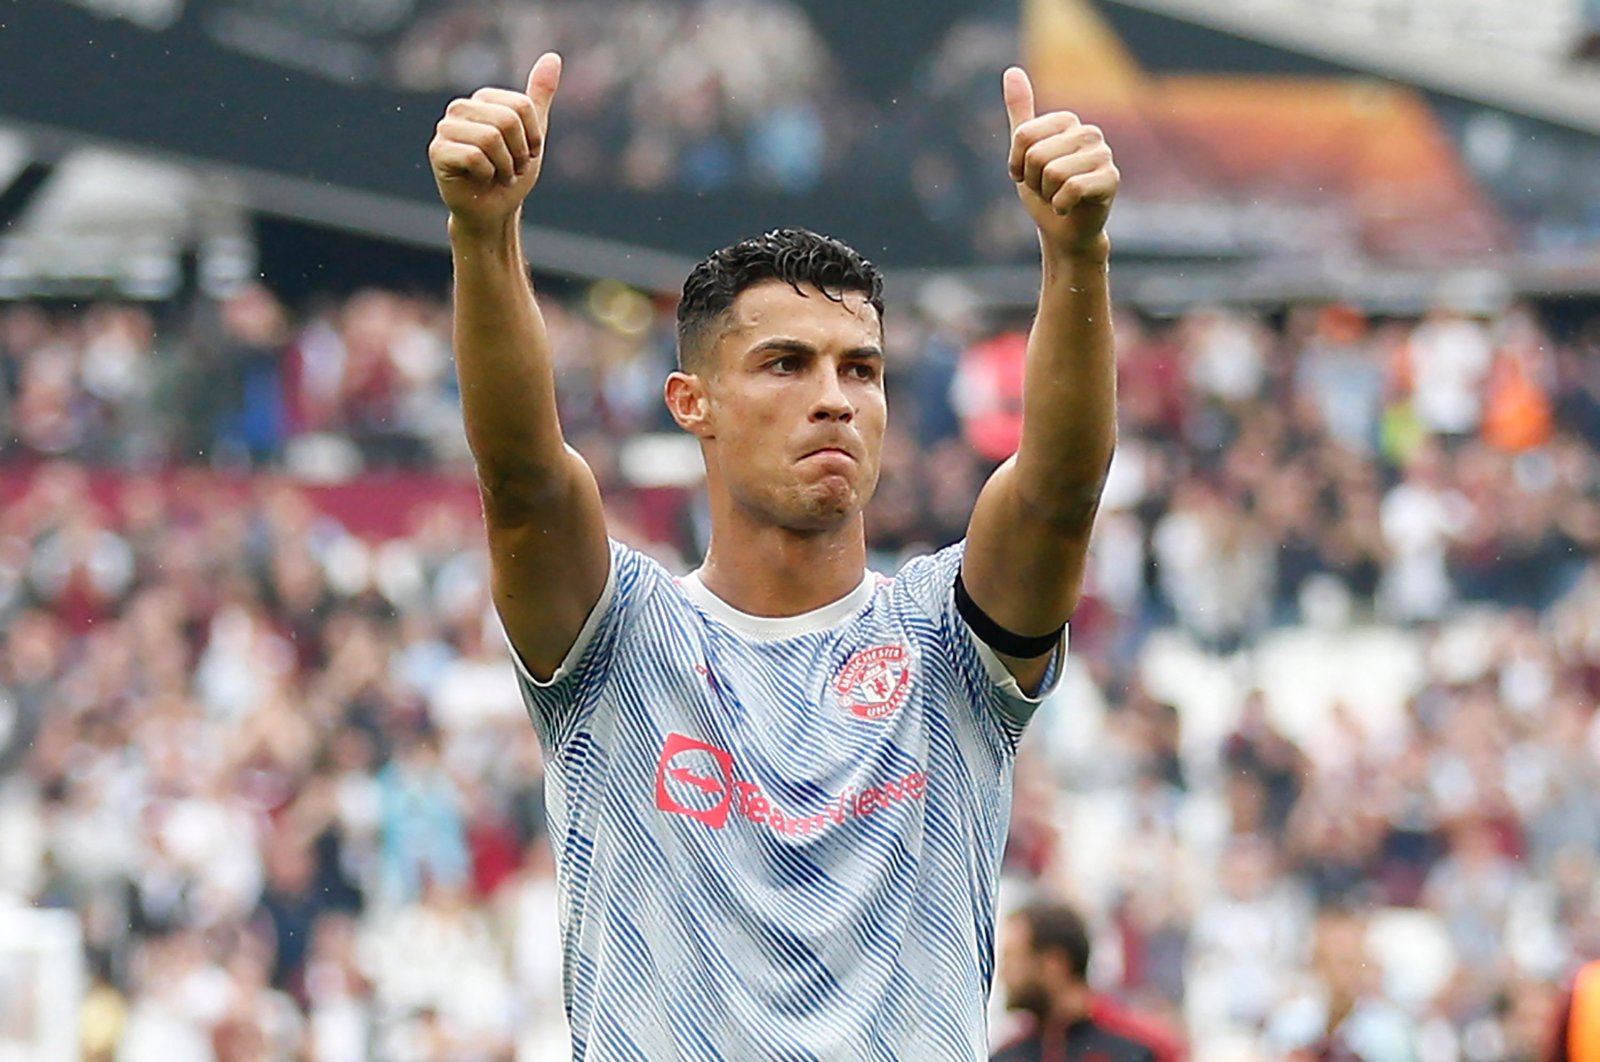 Manchester United's Portuguese striker Cristiano Ronaldo celebrates on the pitch after a Premier League match against West Ham United at The London Stadium, London, England, Sept. 19, 2021. (AFP Photo)